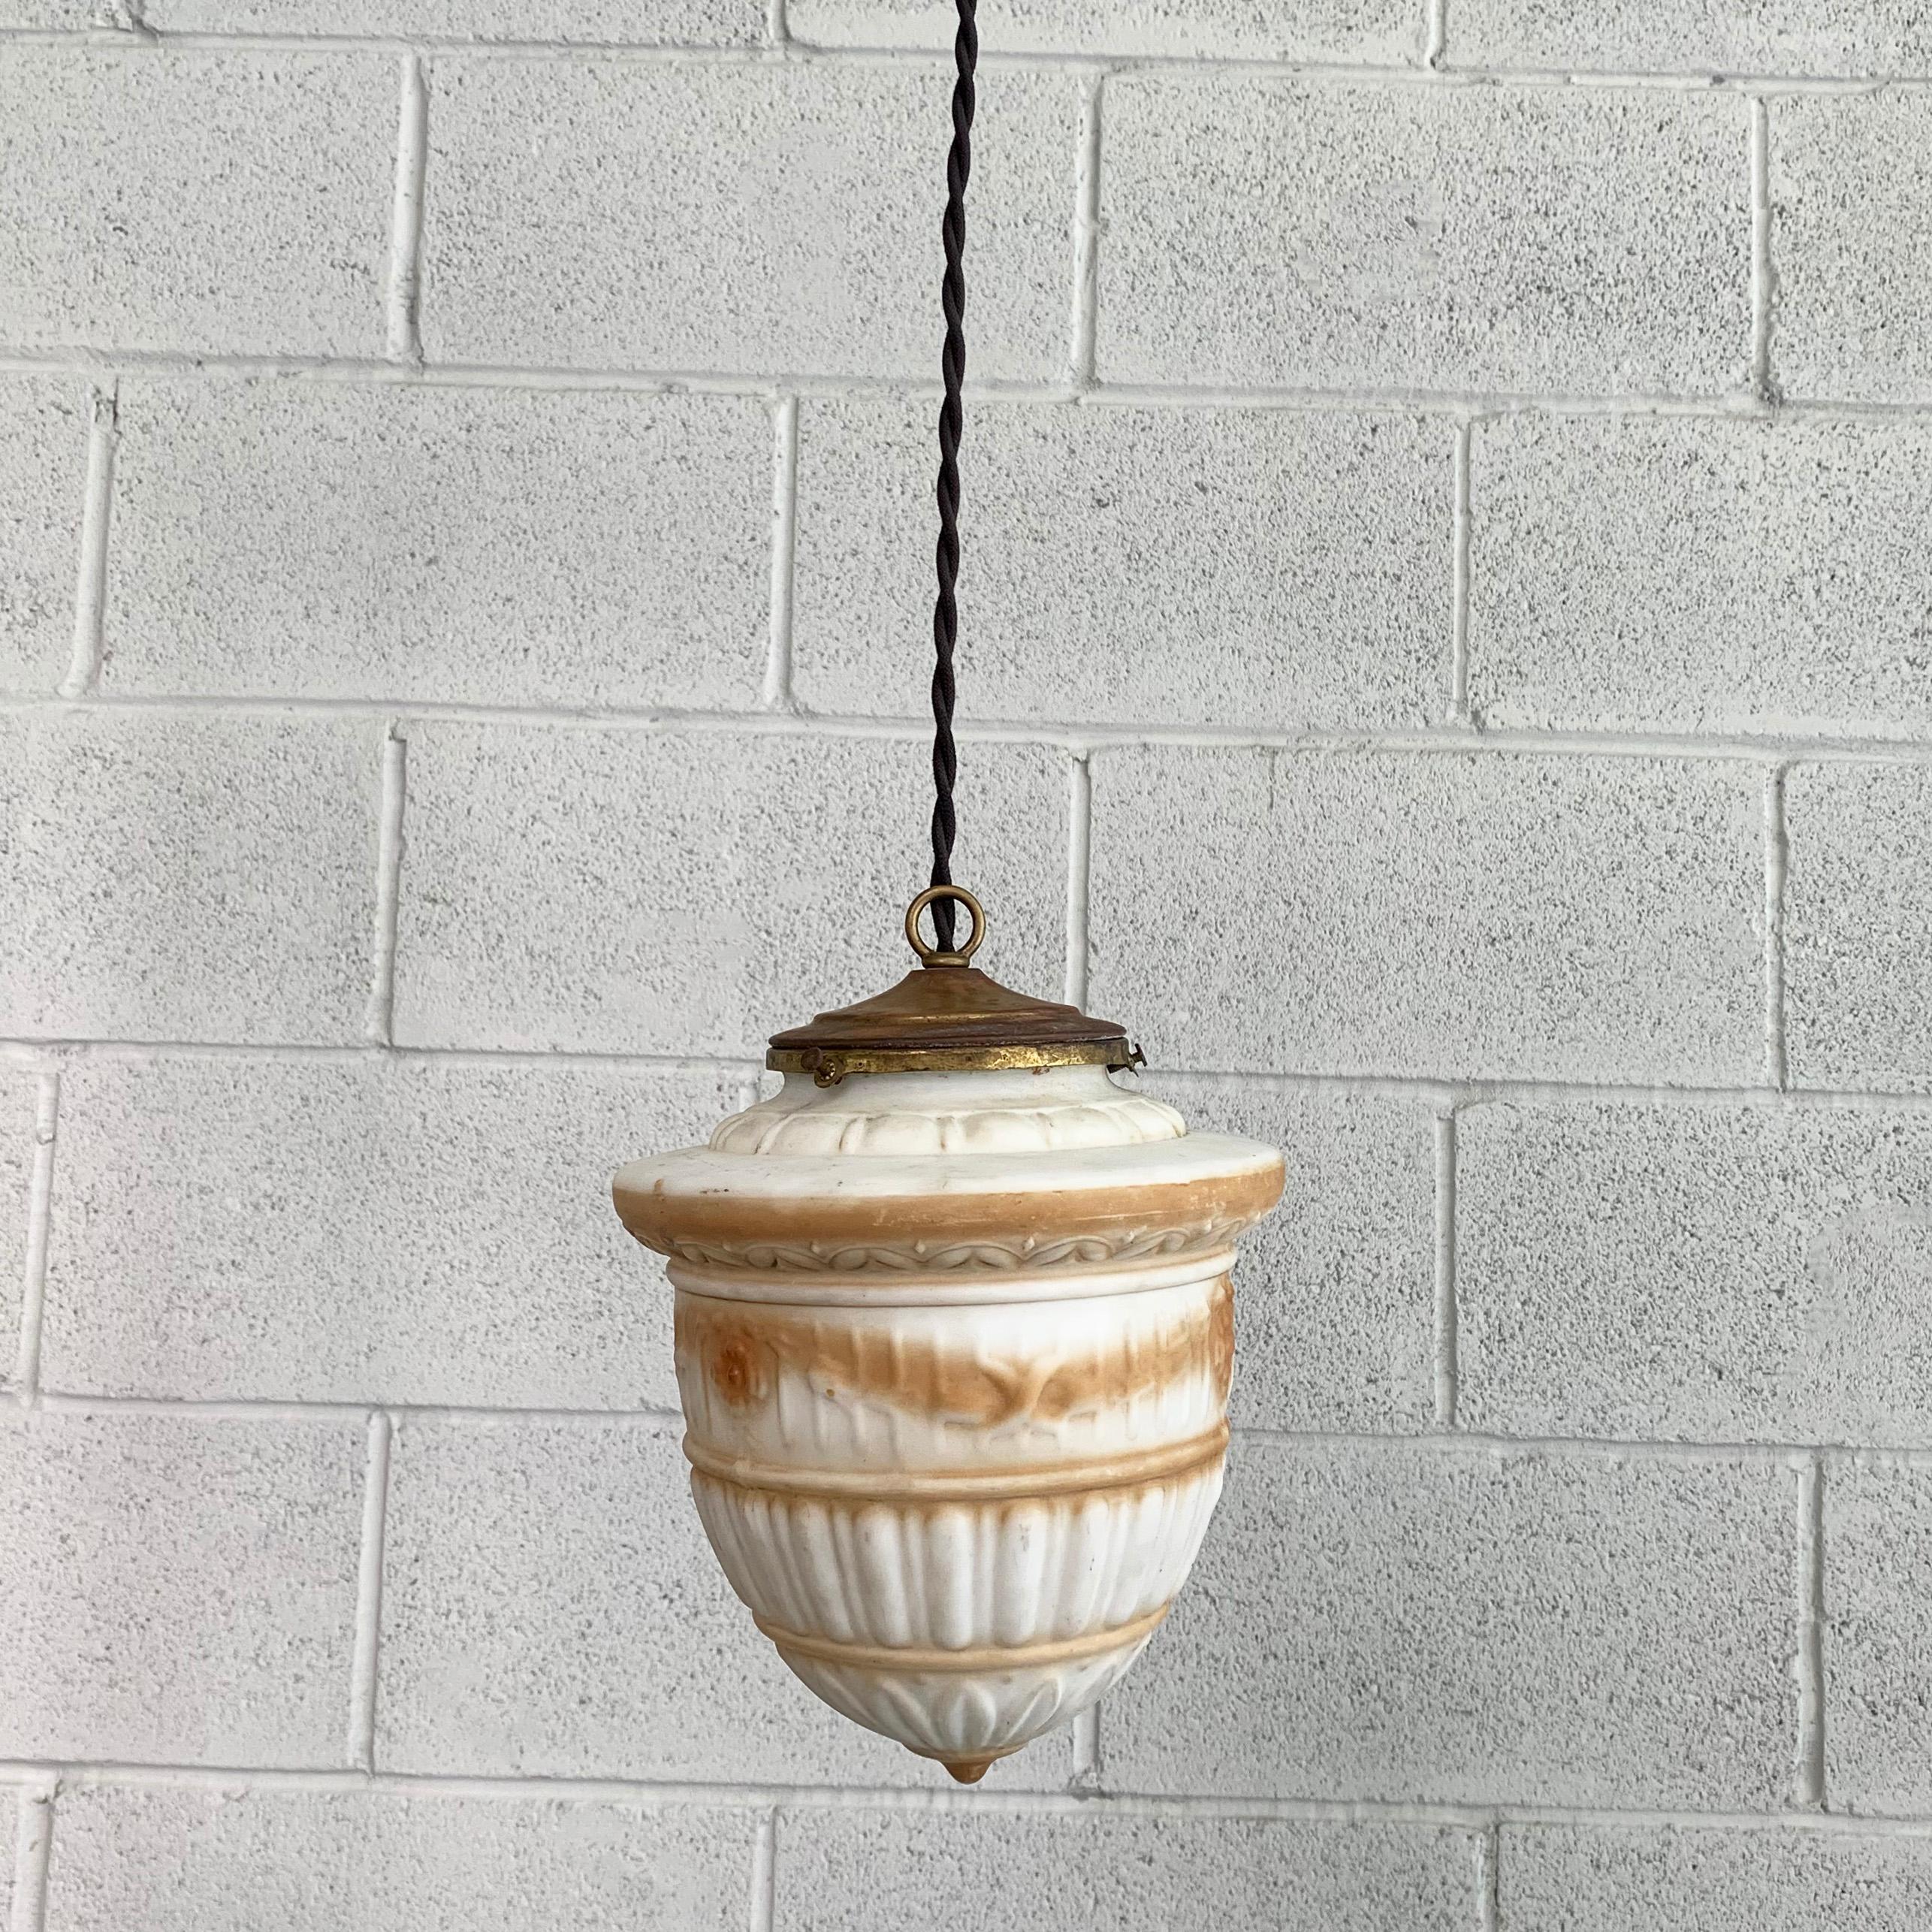 Art Deco pendant light featuring a hand-decorated, airbrushed glass shade with brass fitter is newly wired with 40 inches of braided cloth cord to accept up to a 100 watt bulb.